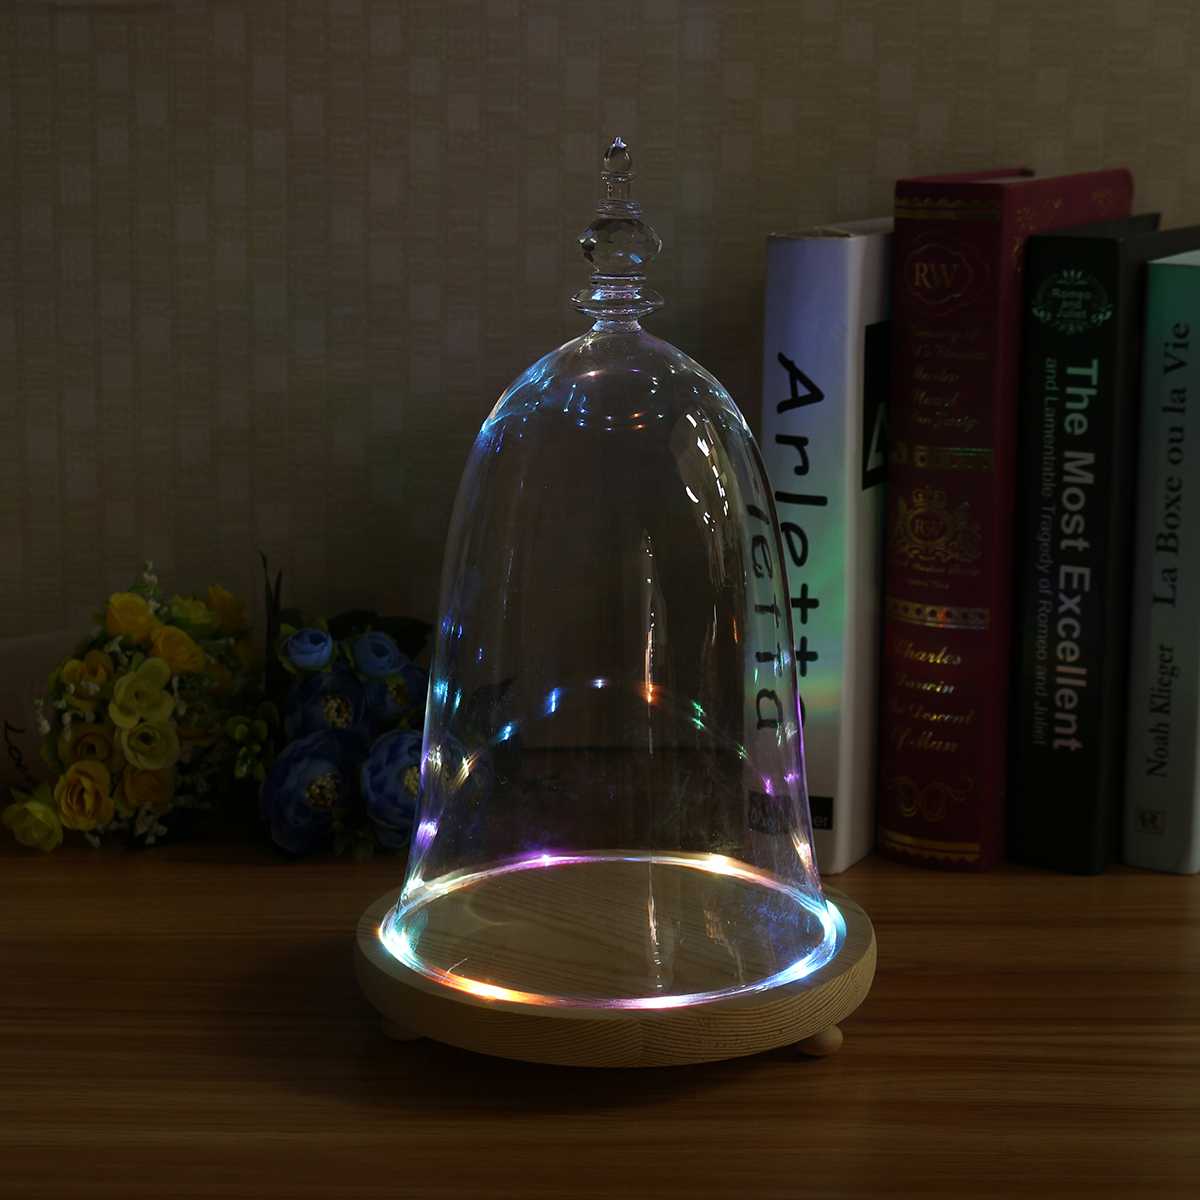 Home Decor Vases Glass Flower Display Cloche Bell Jar Dome Immortal Preservation With Wooden Base Everlasting Flower Glass Cover: Colorful